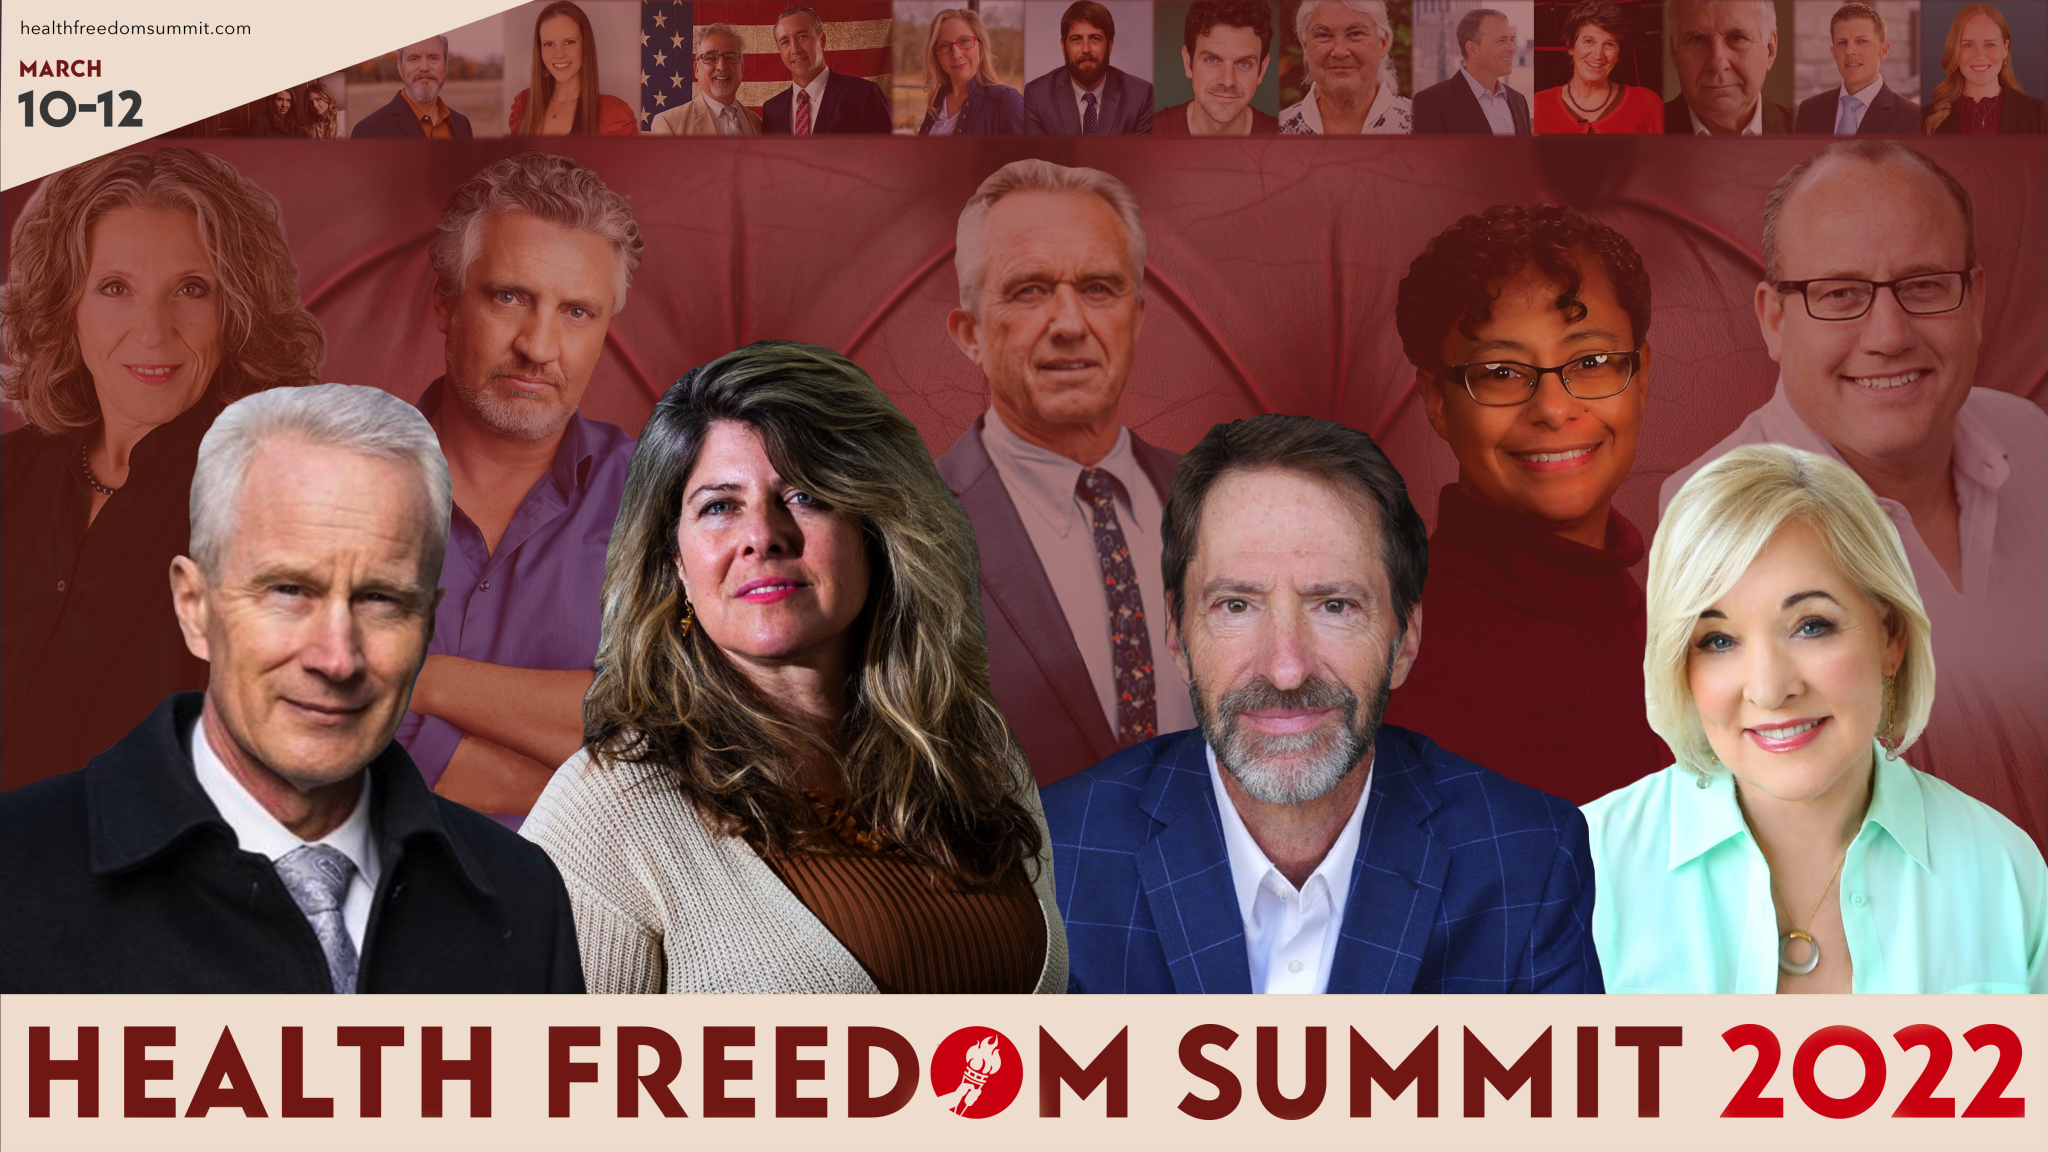  Don’t Miss The Health Freedom Summit March 10-12, 2022